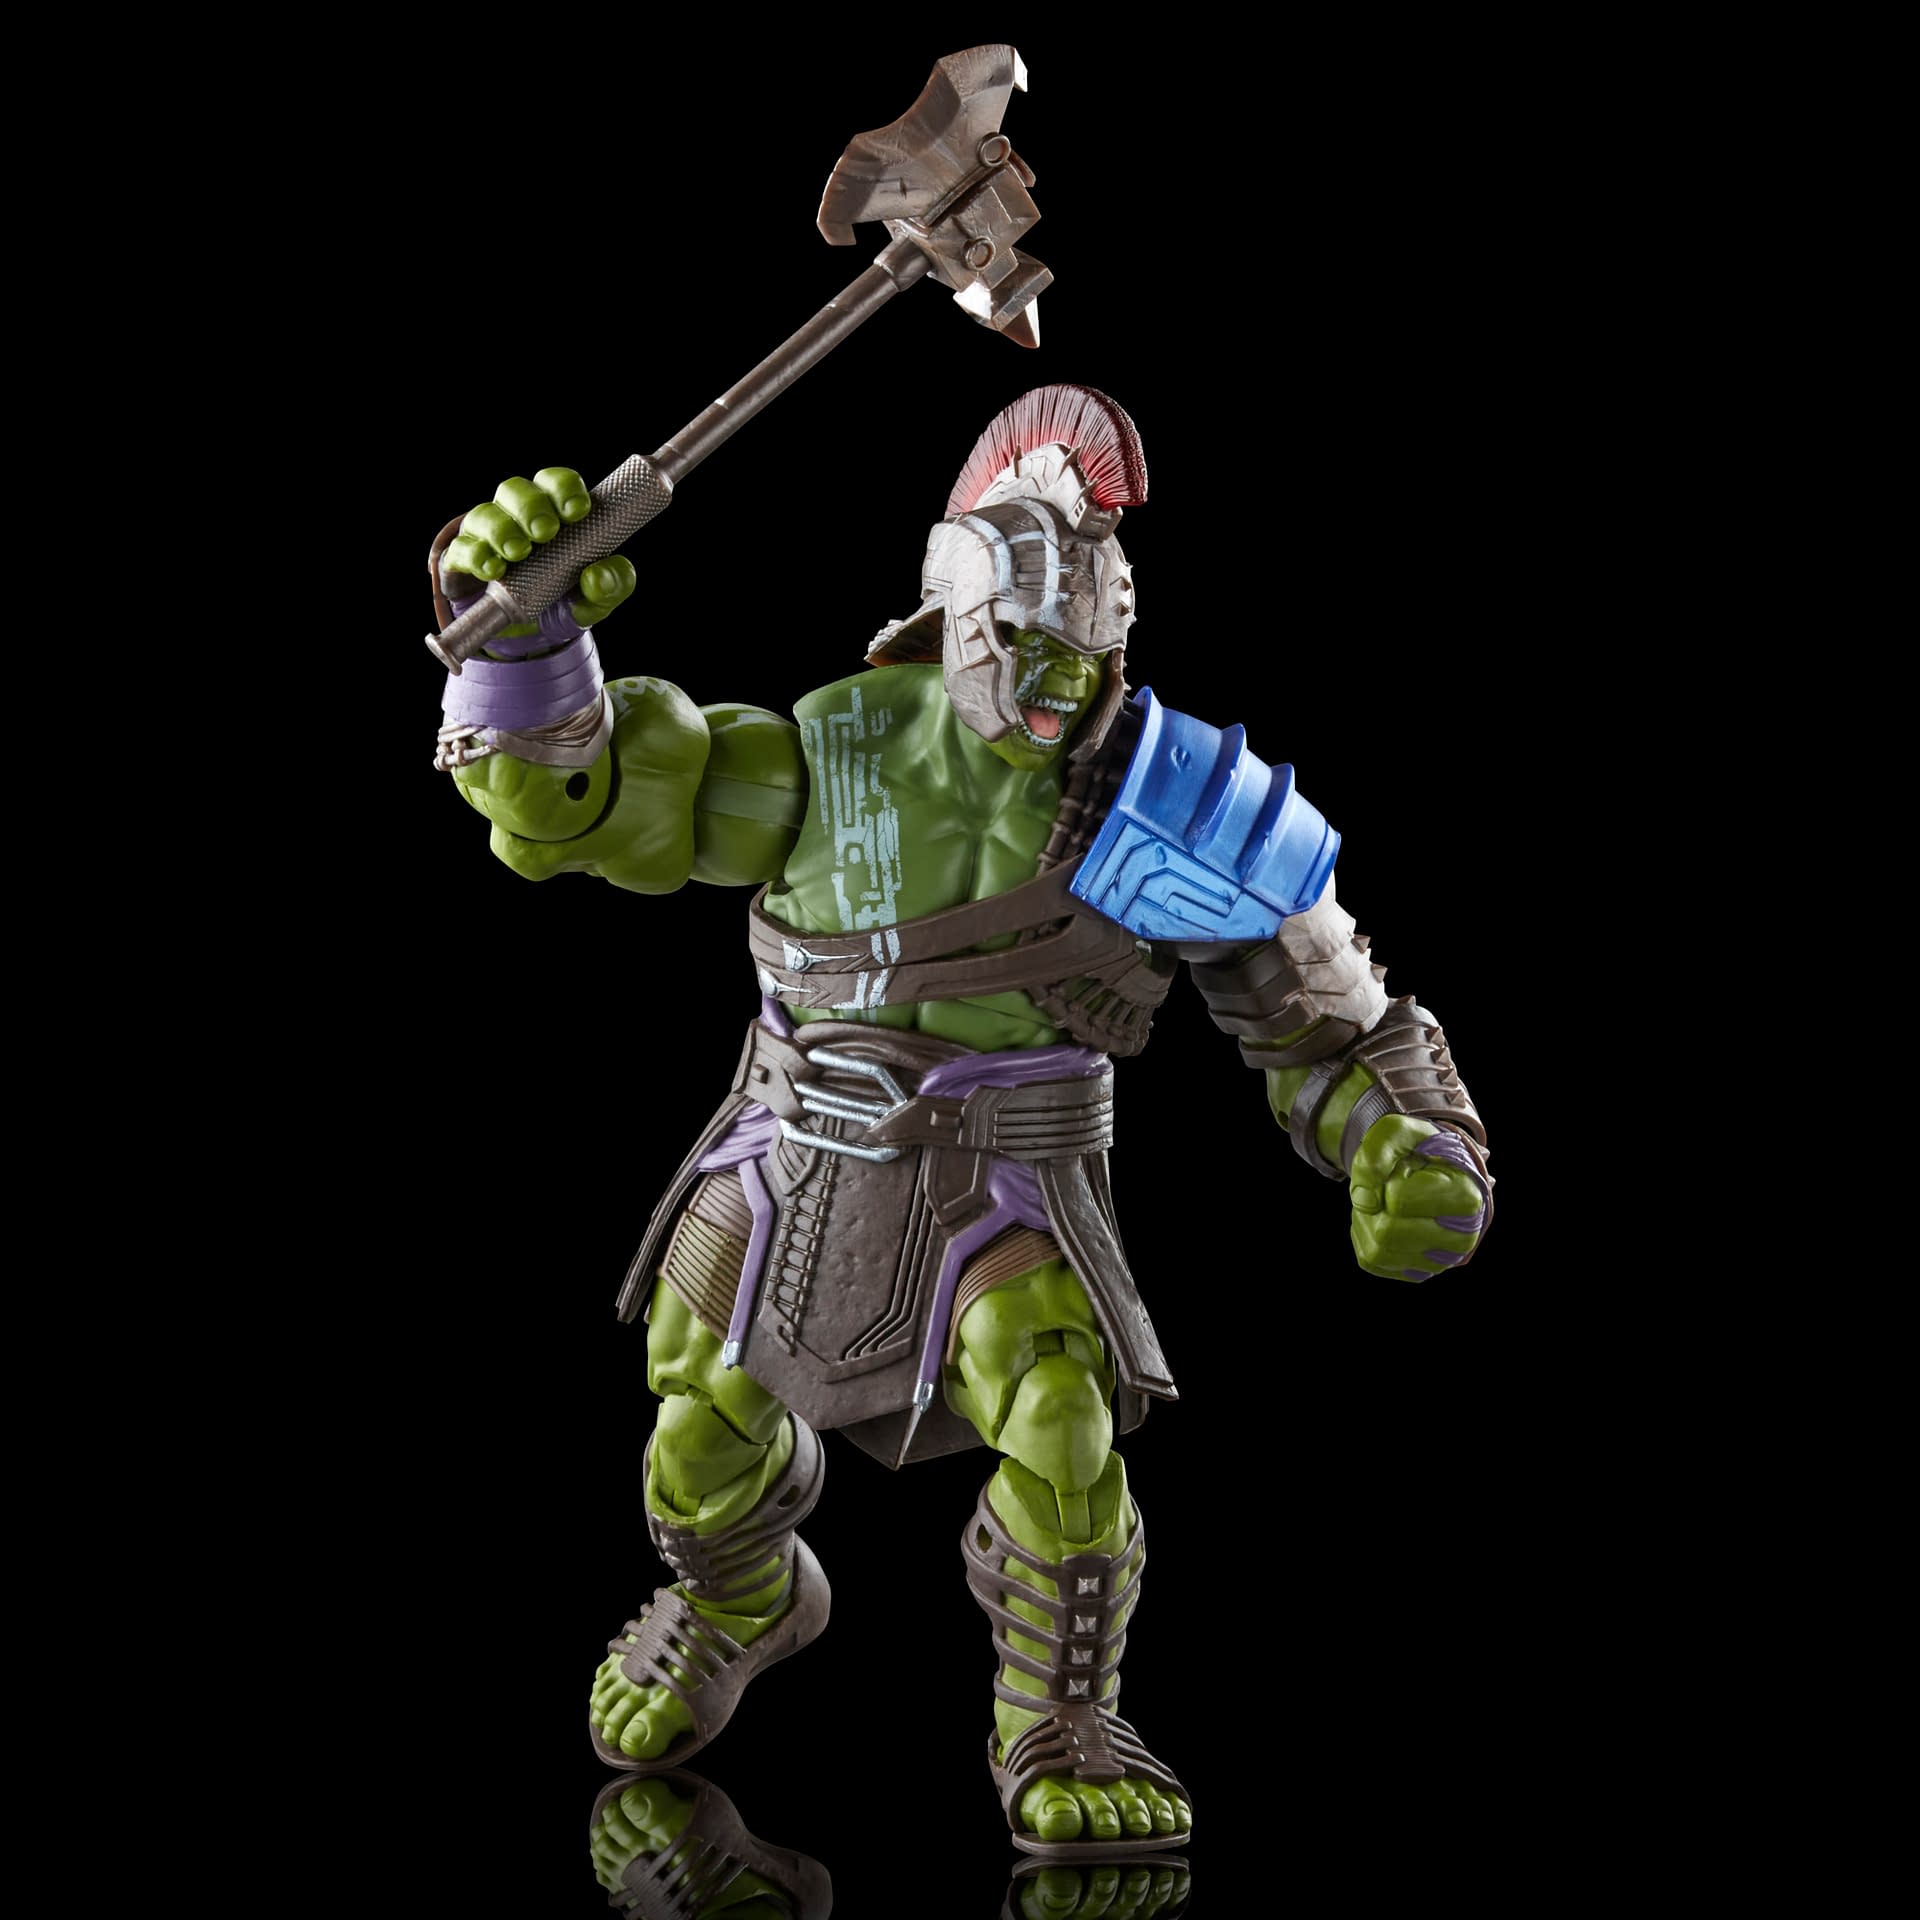 Gladiator Hulk Enters the Arena with Deluxe Marvel Legends Figure